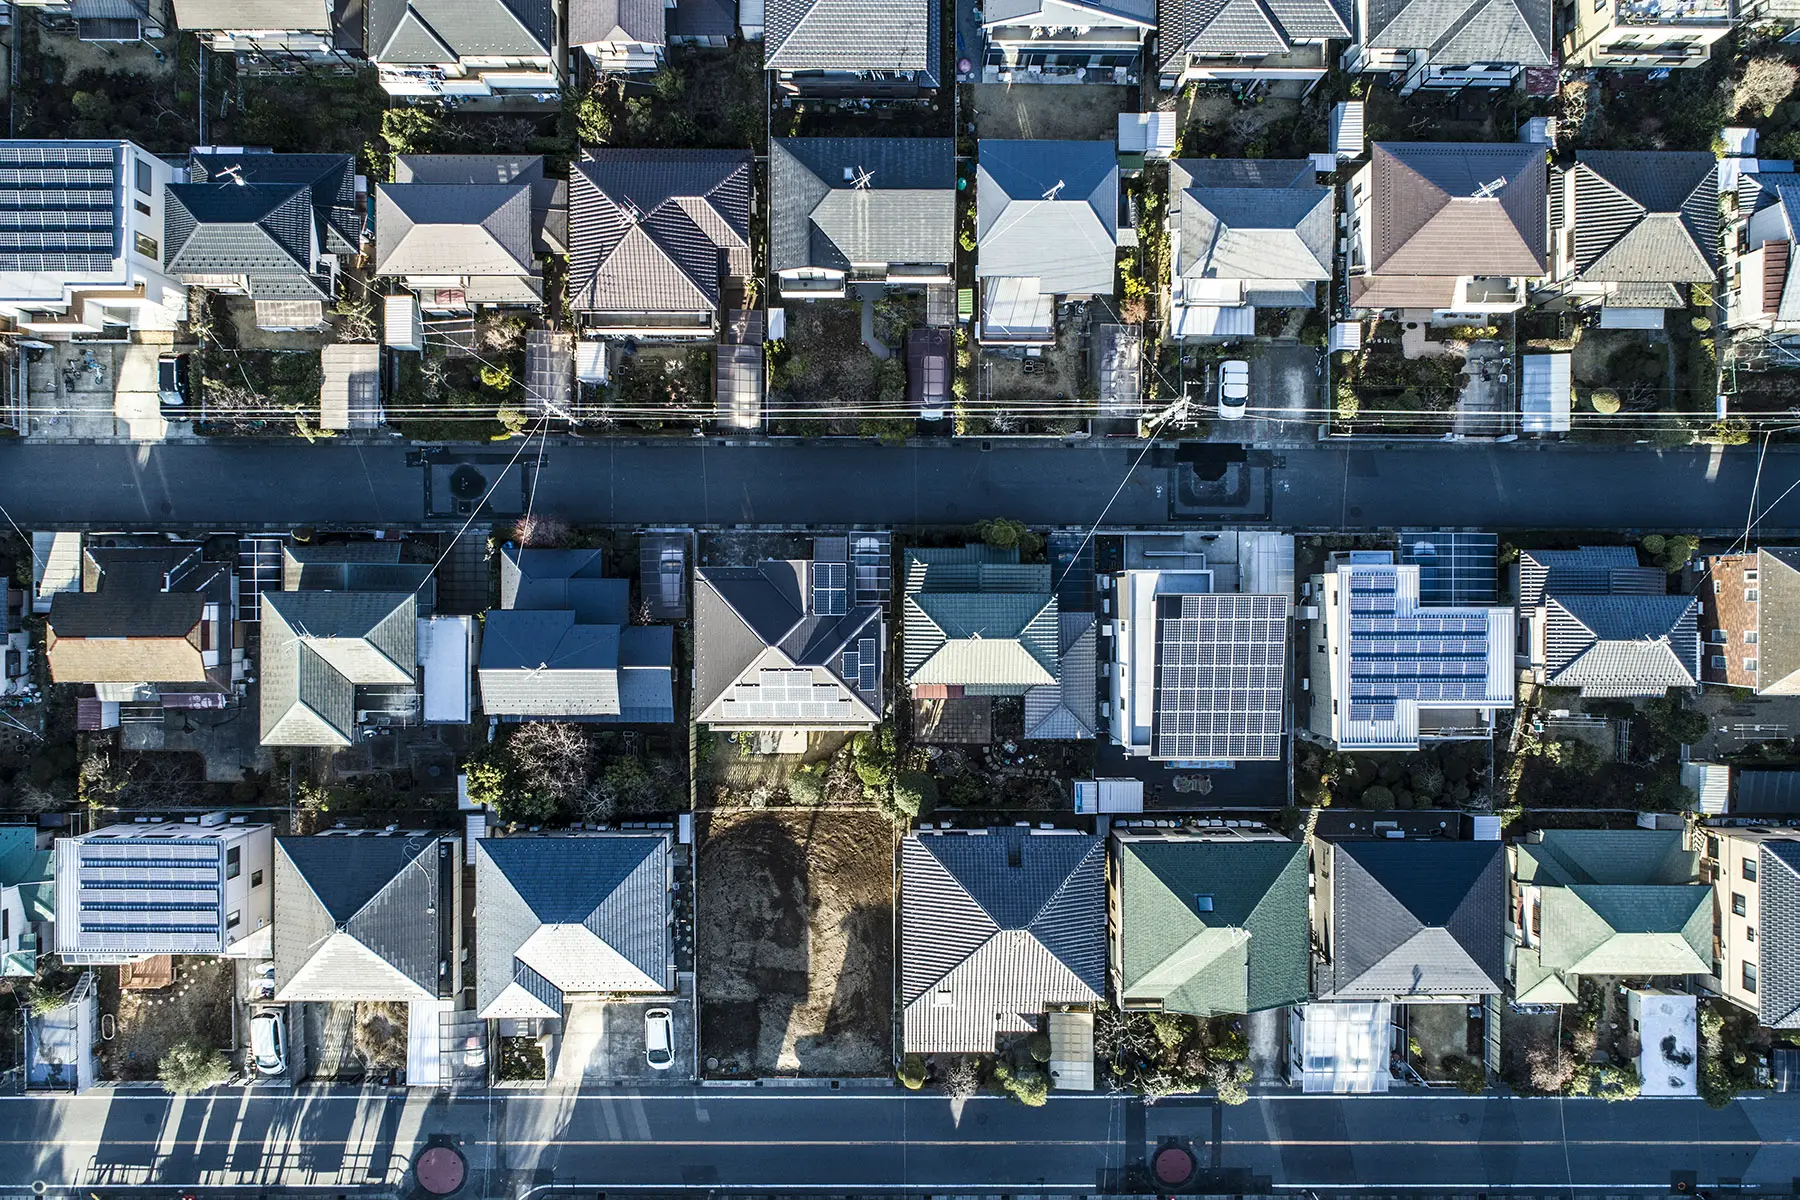 Aerial view of Japanese suburbia